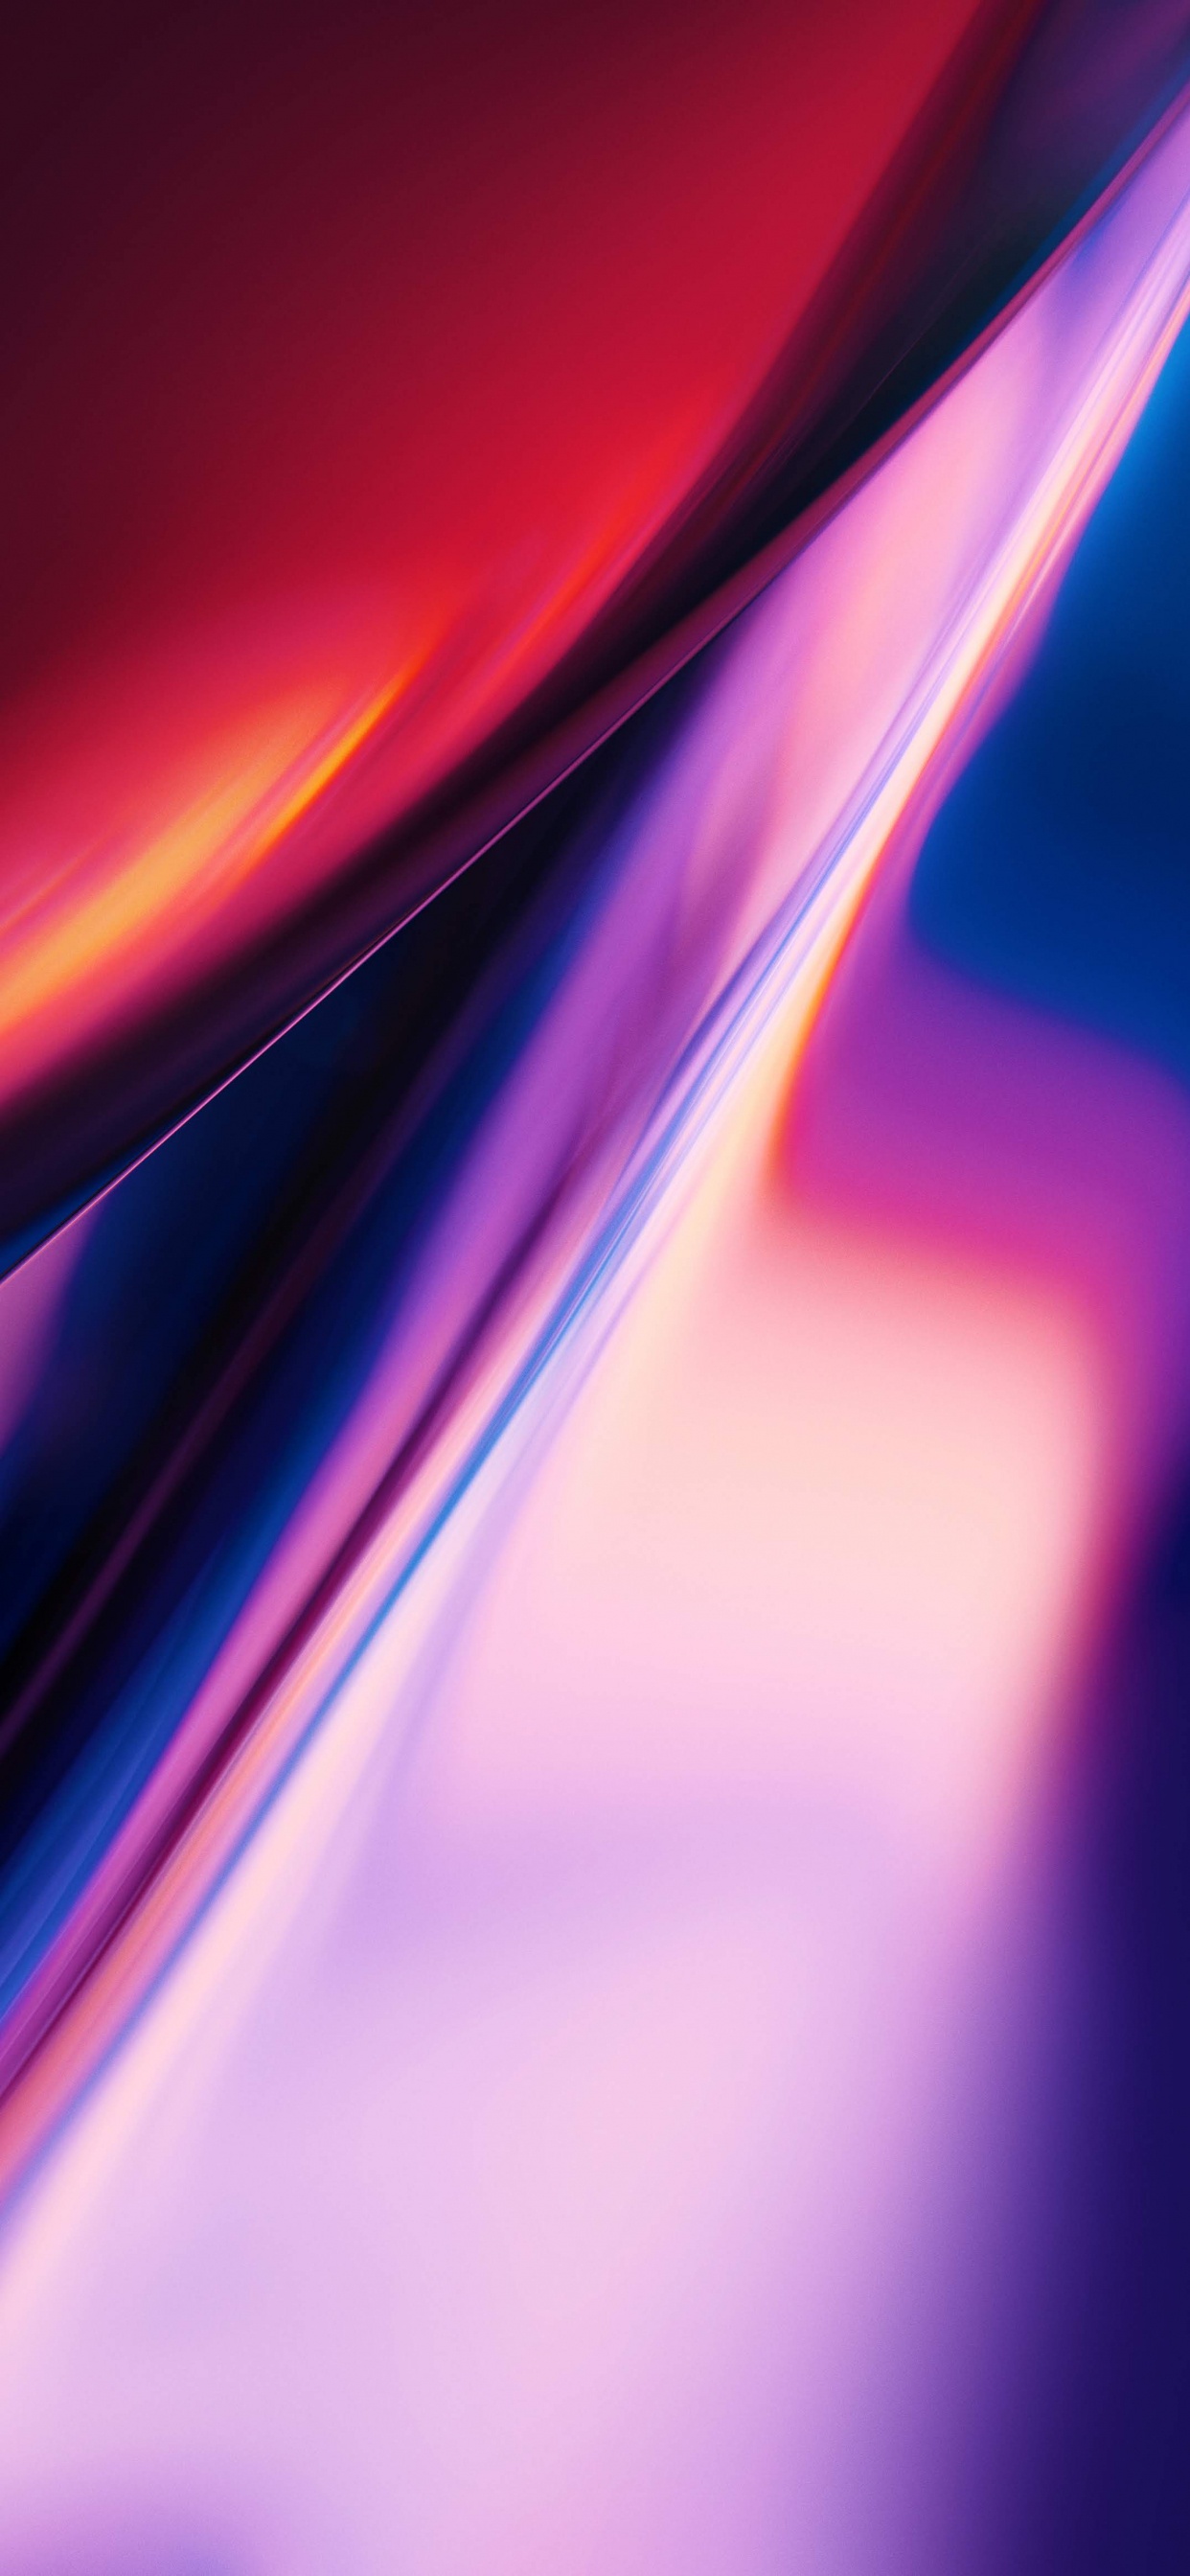 OnePlus 7 Pro, Oneplus 7t, Oneplus 8, Android, Azul. Wallpaper in 1242x2688 Resolution